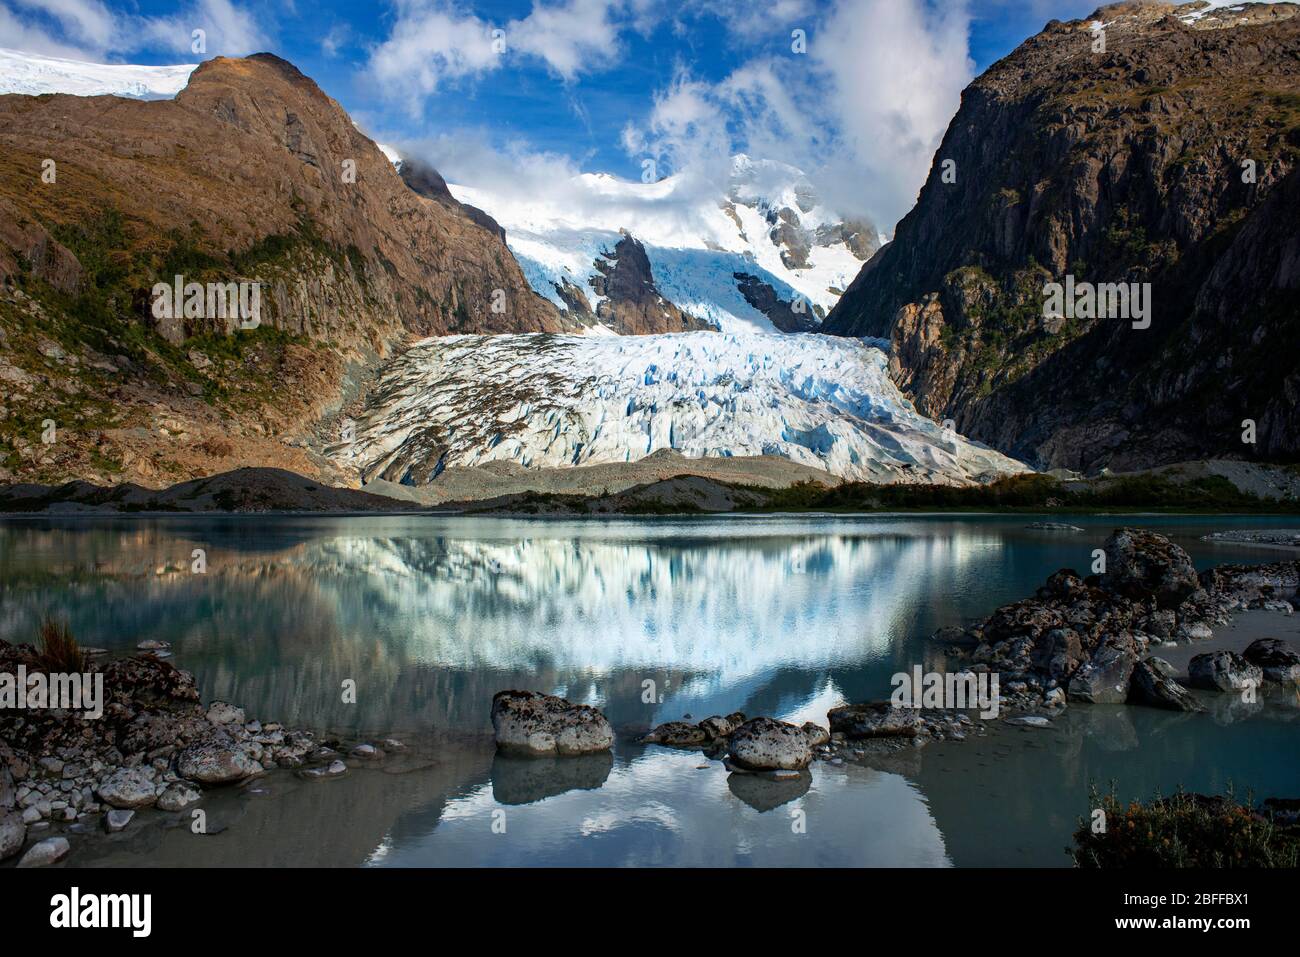 Bernal glacier in the Las montanas fjord On The Edge Of The Sarmiento Channel in Bernardo O'Higgins National Park in Patagonia Chile fjords near Puert Stock Photo